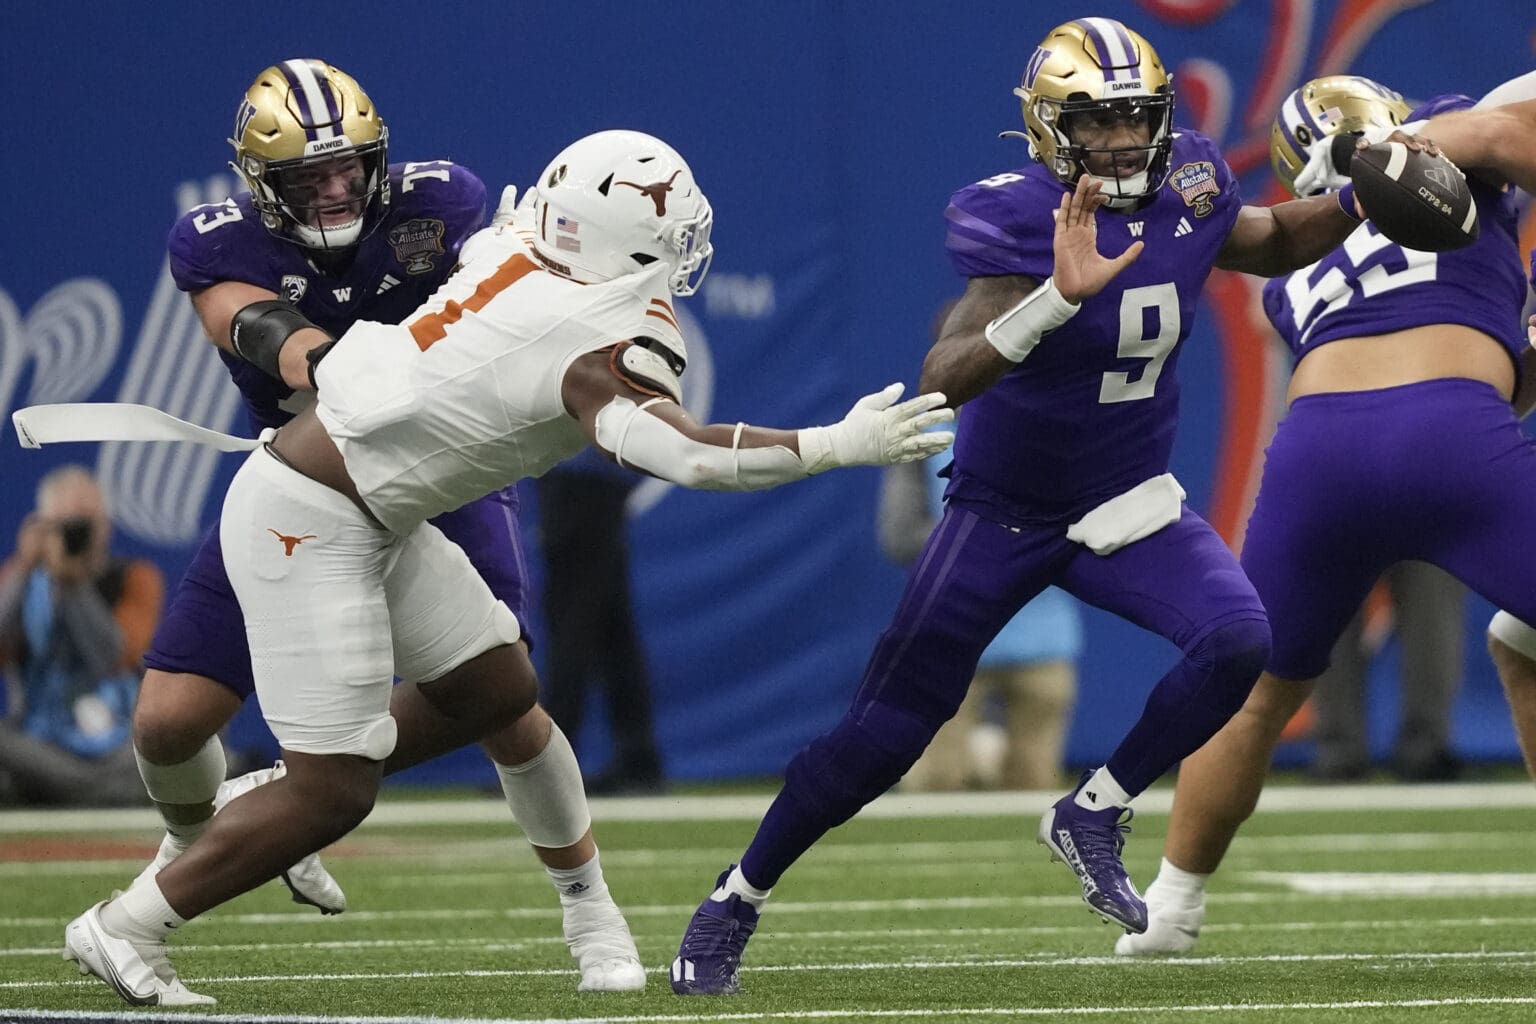 Washington quarterback Michael Penix Jr. (9) scrambles with the ball against Texas defensive end Justice Finkley (1) as the defender himself is being grabbed by Micheal Penix Jr's teammate.